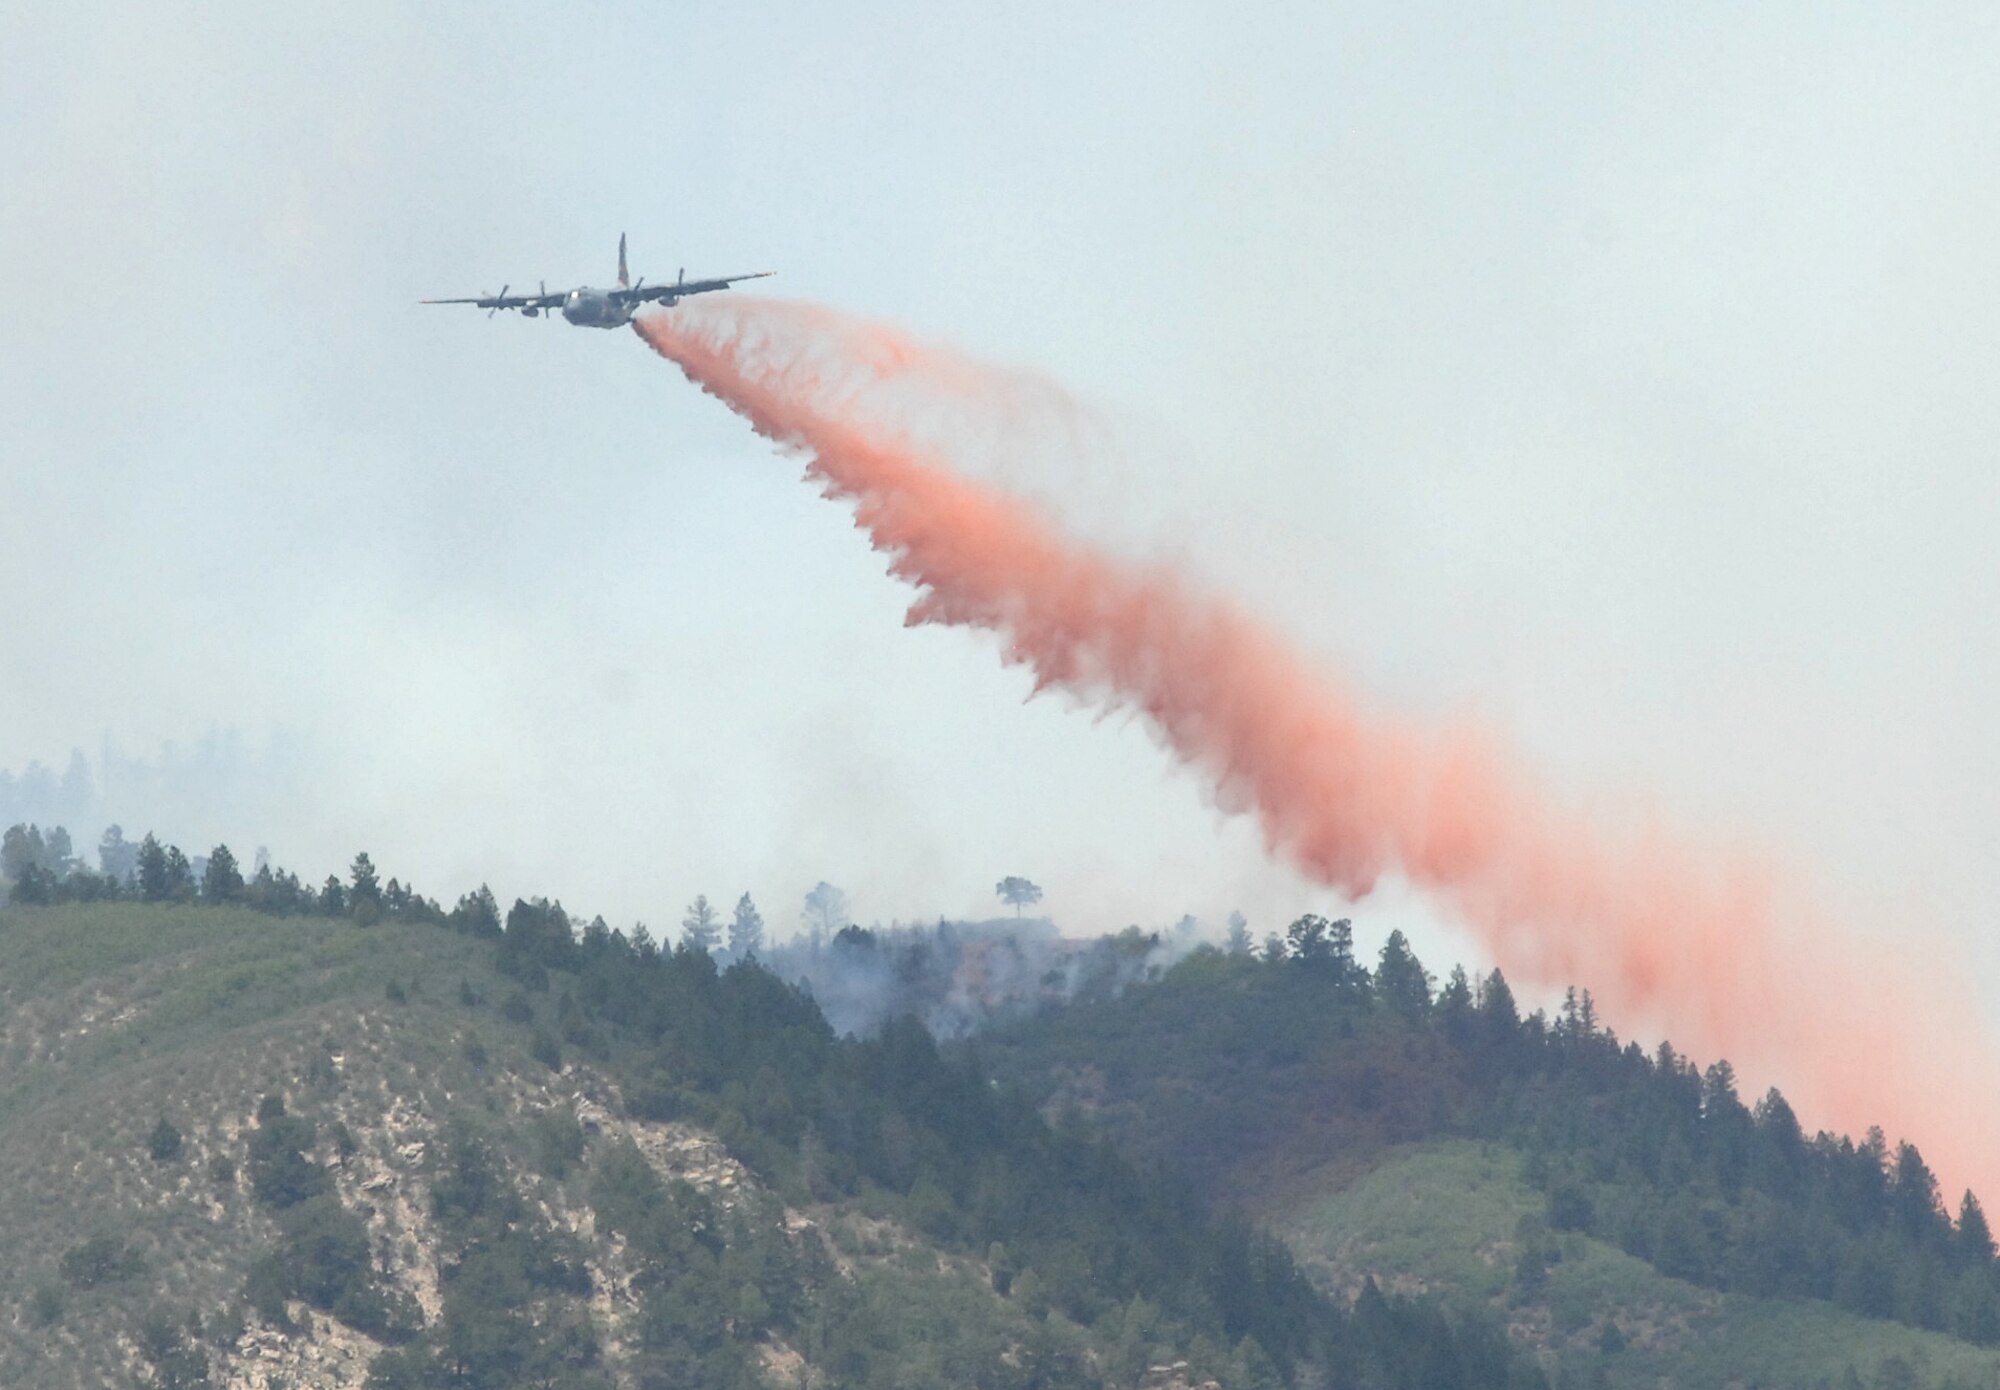 COLORADO SPRINGS, Colo. - A Modular Airborne Fire Fighting System-equipped C-130 drops retardant on a section of the Waldo Canyon fire near Colorado Springs, Colo. June 26. Four MAFFS aircraft from the 302nd and 153rd Airlift Wings are supporting civil authorities as they combat the fire, which has burned since June 23. (U.S. Air Force photo by Tech. Sgt. Thomas J. Doscher)